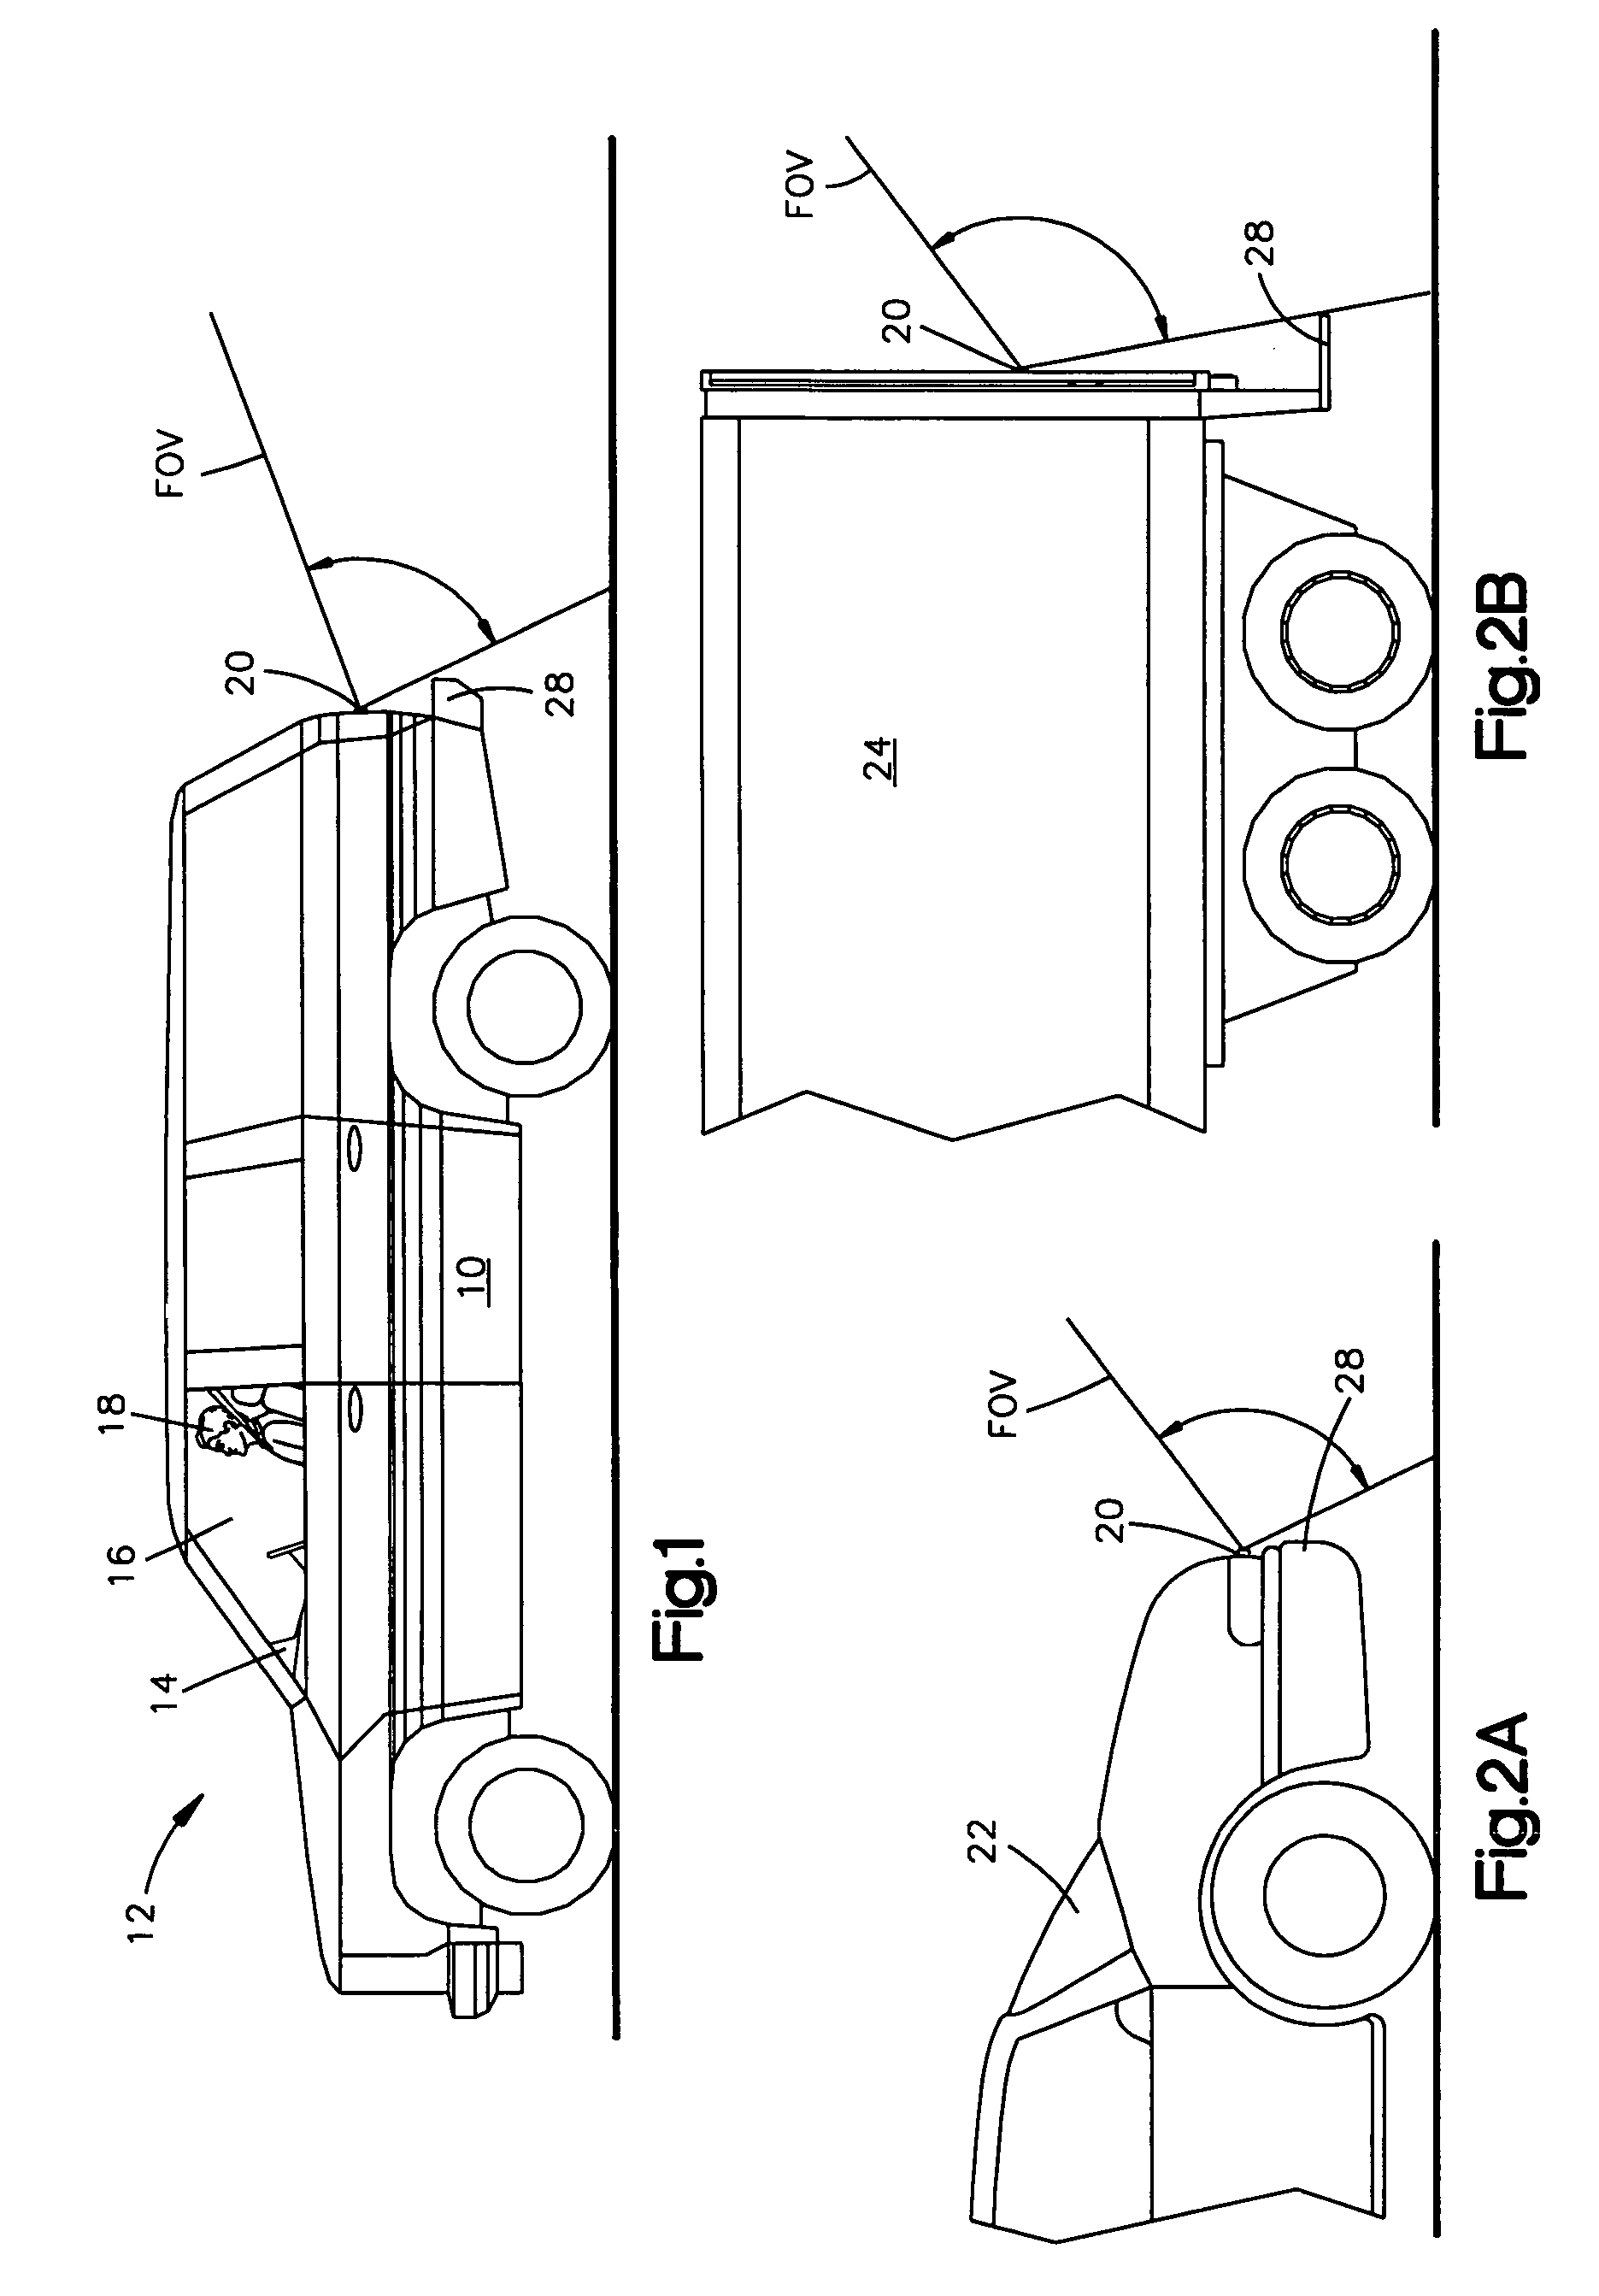 Method and apparatus for distortion correction and image enhancing of a vehicle rear viewing system